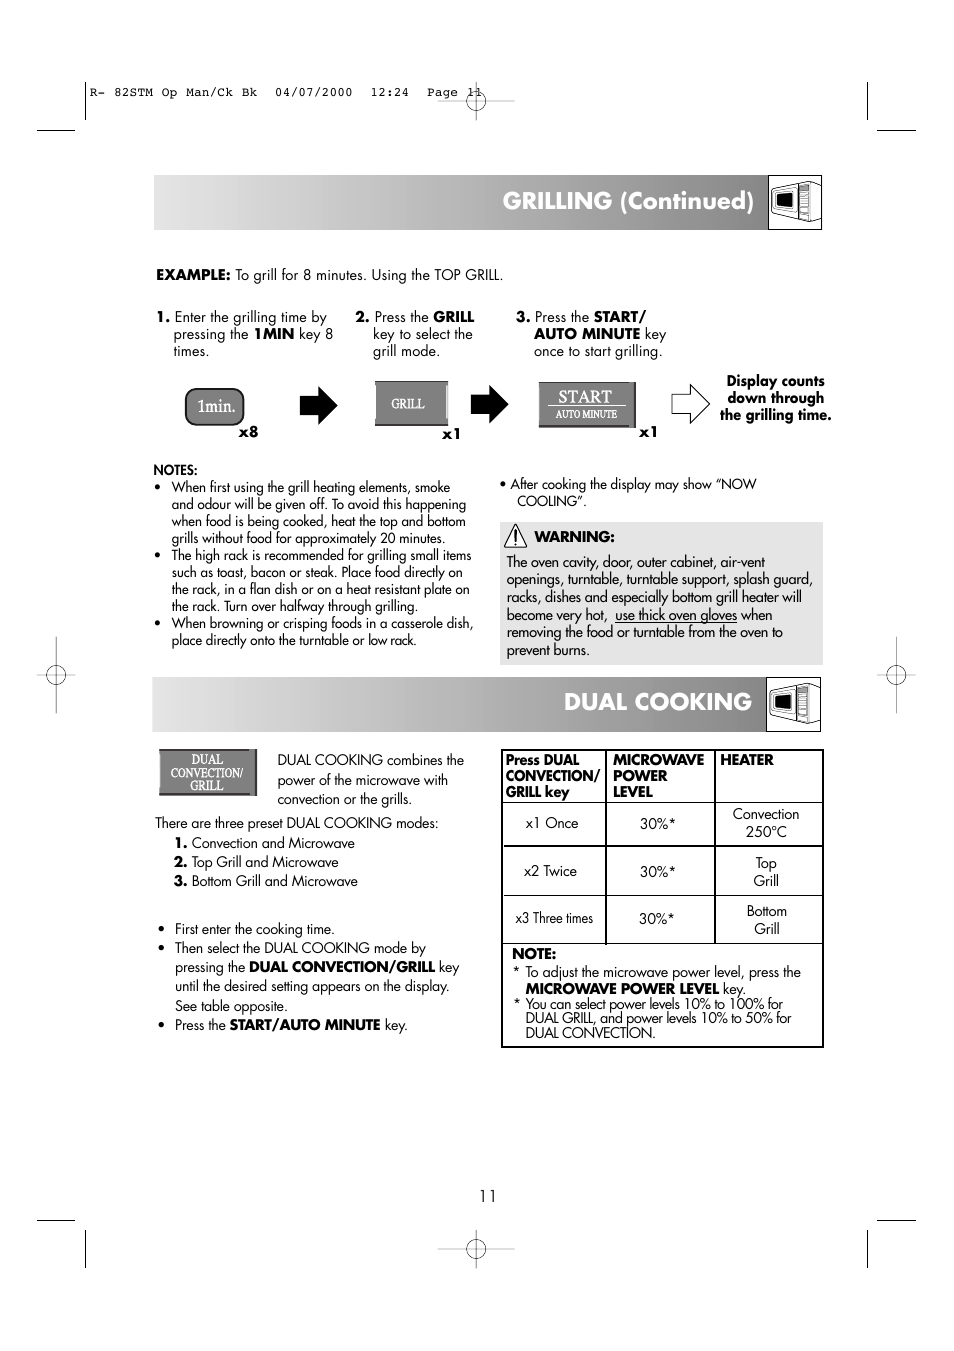 Grilling (continued) dual cooking | Sharp R82STMA User Manual | Page 13 / 68